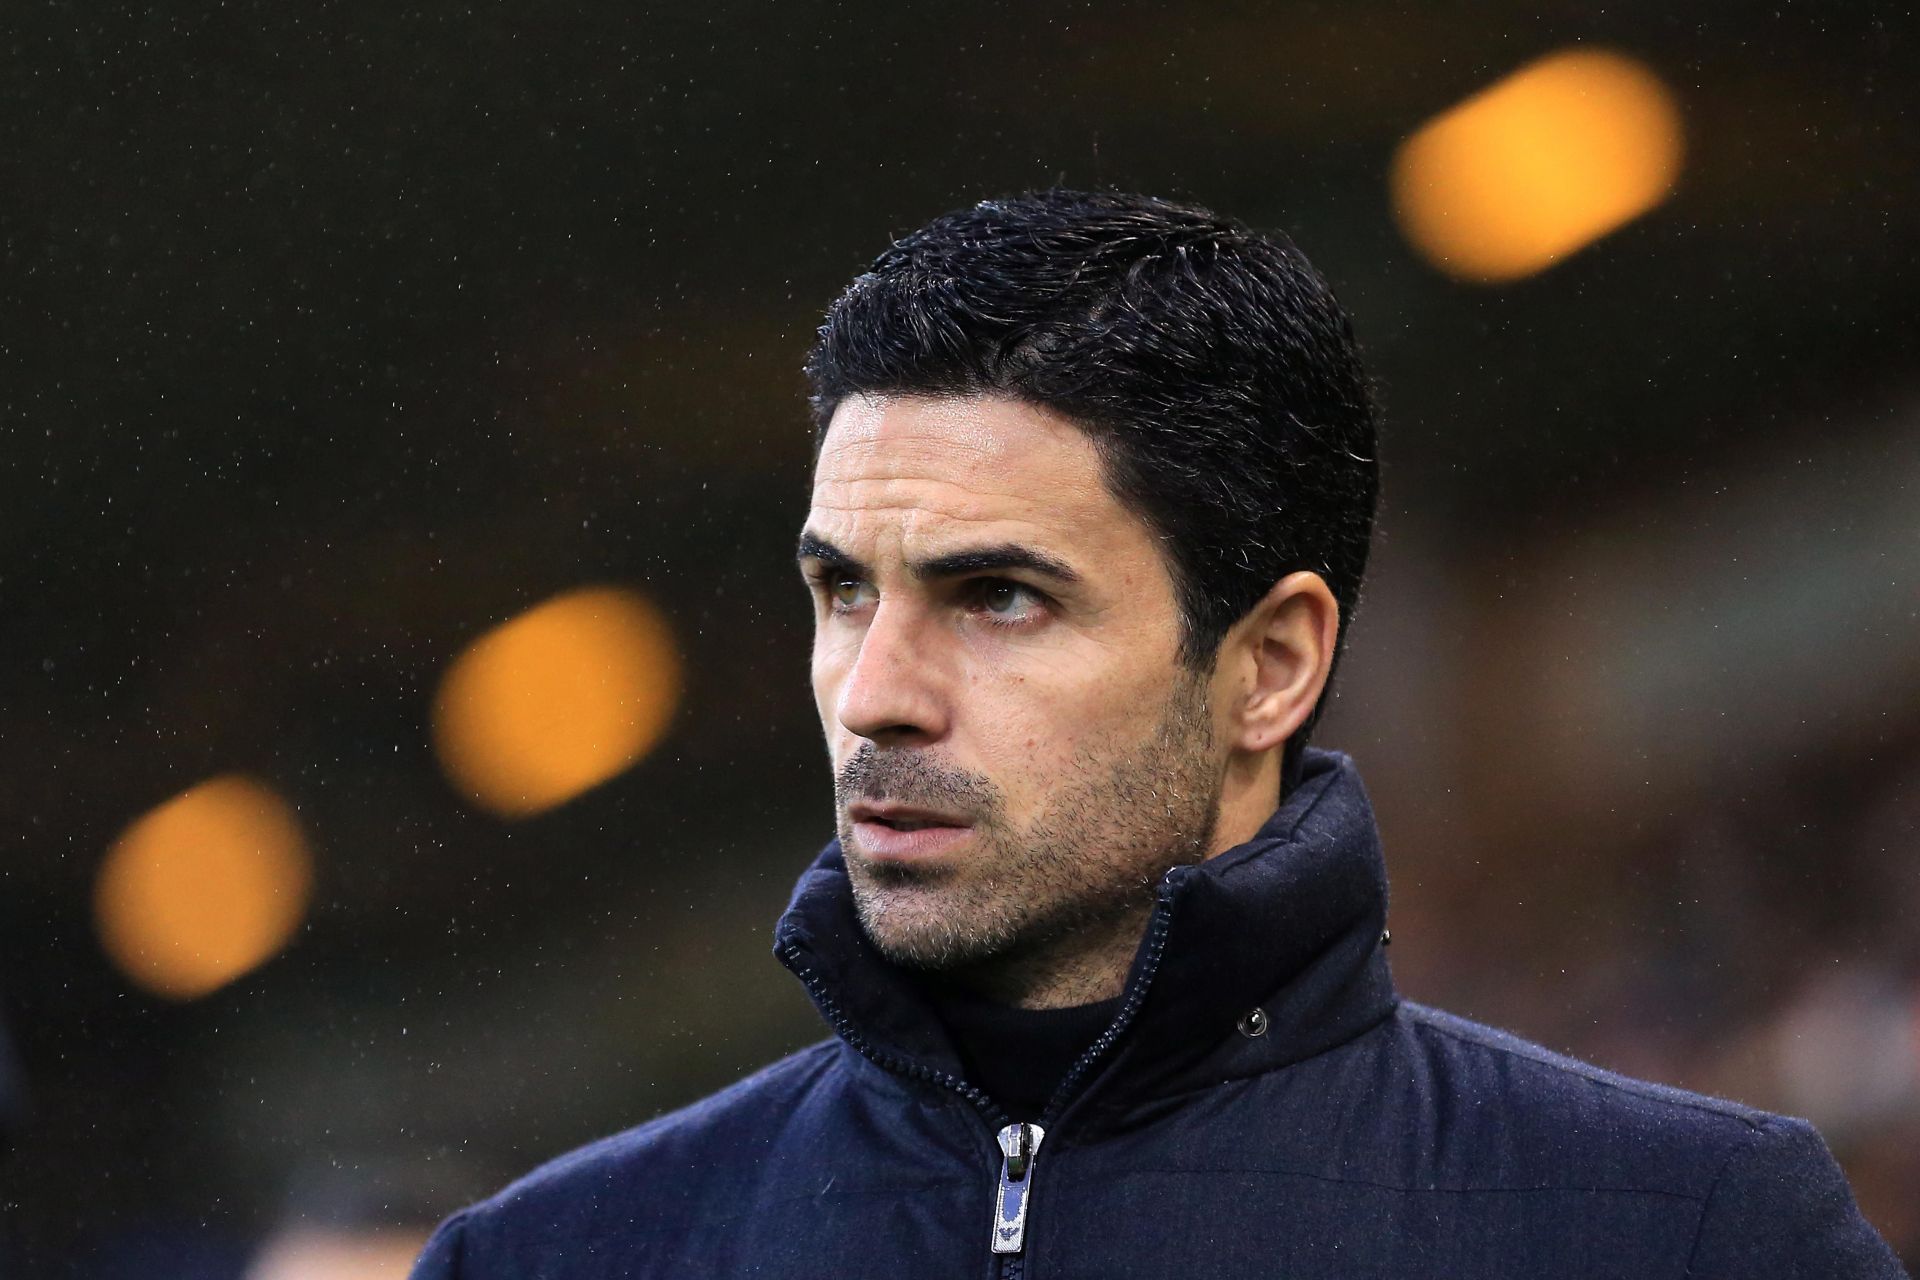 Arsenal manager Mikel Arteta secured a win over Brentford on Saturday